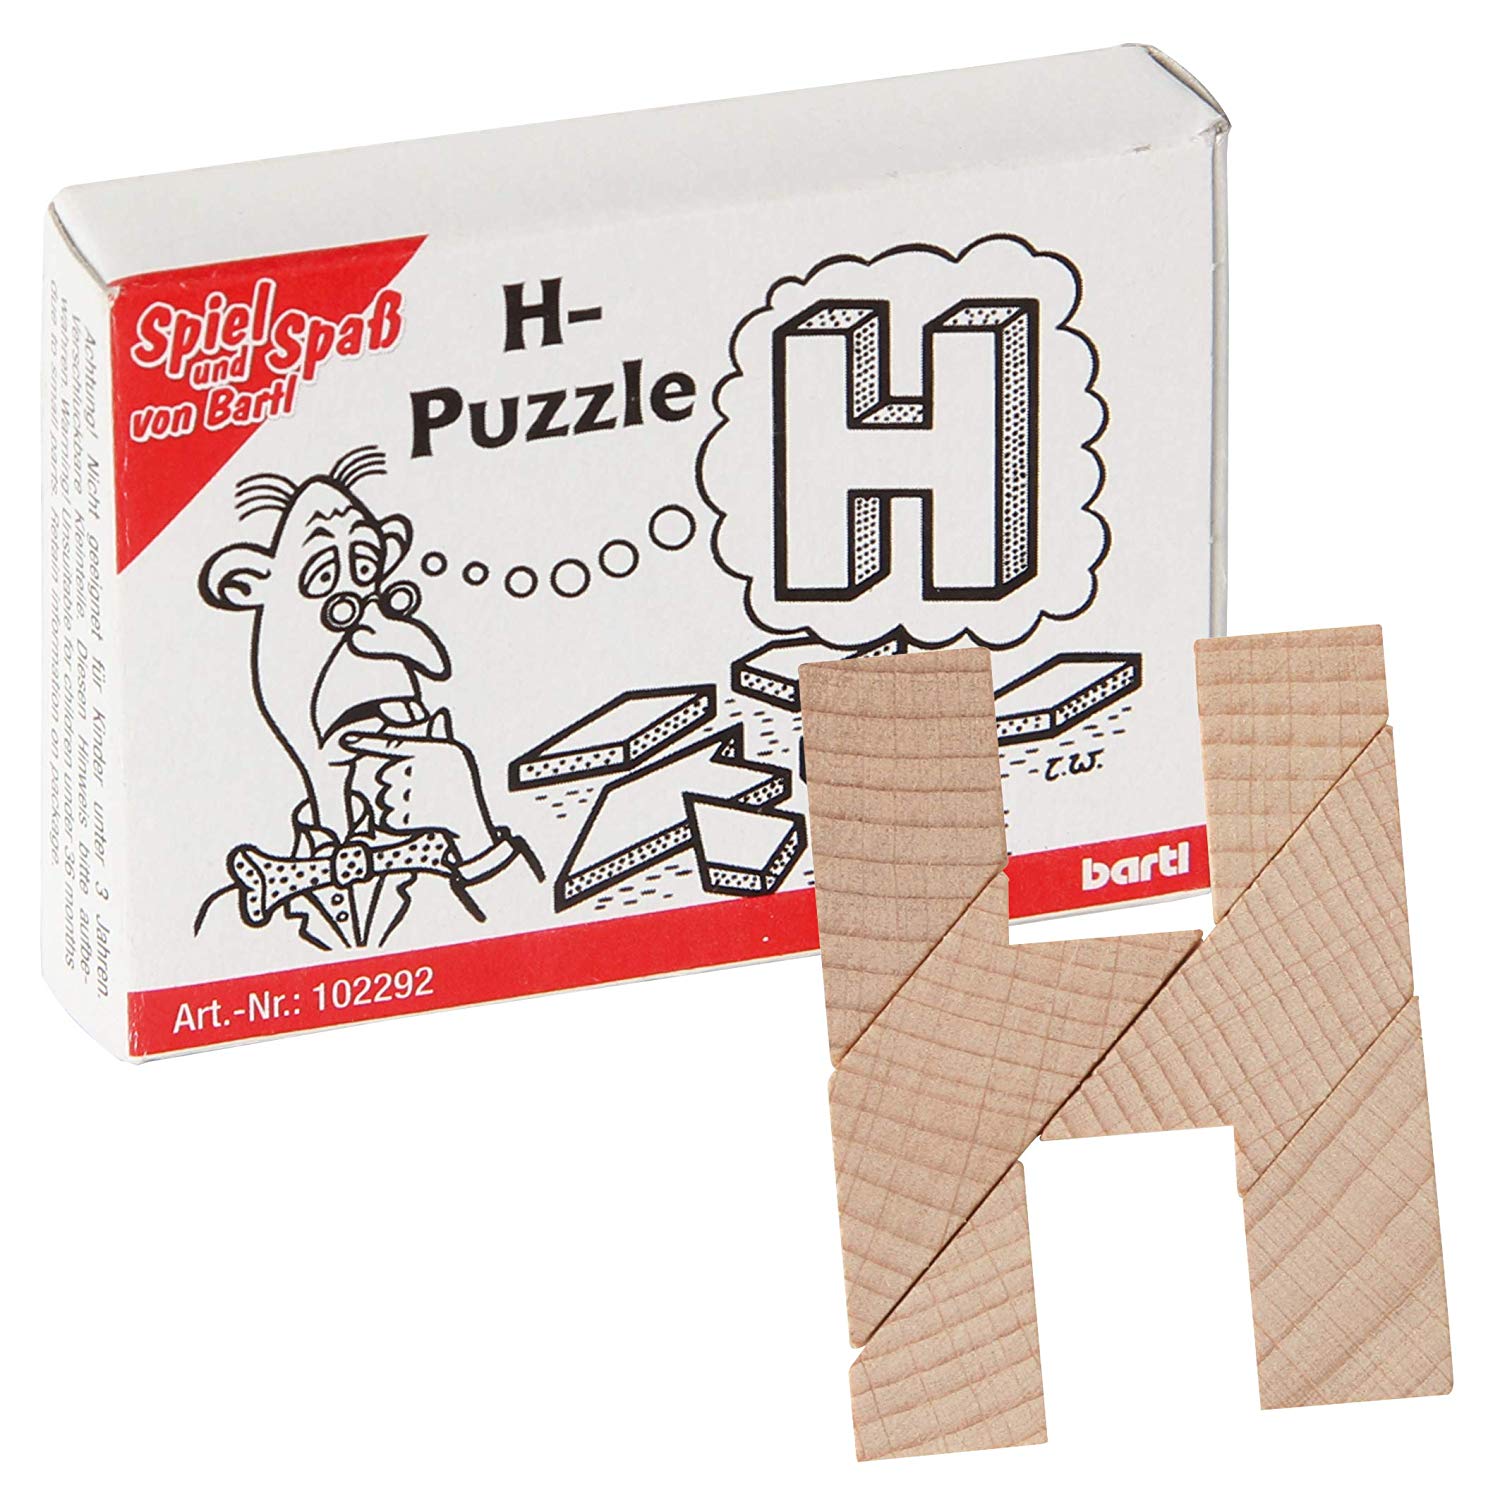 The H-Puzzle 13